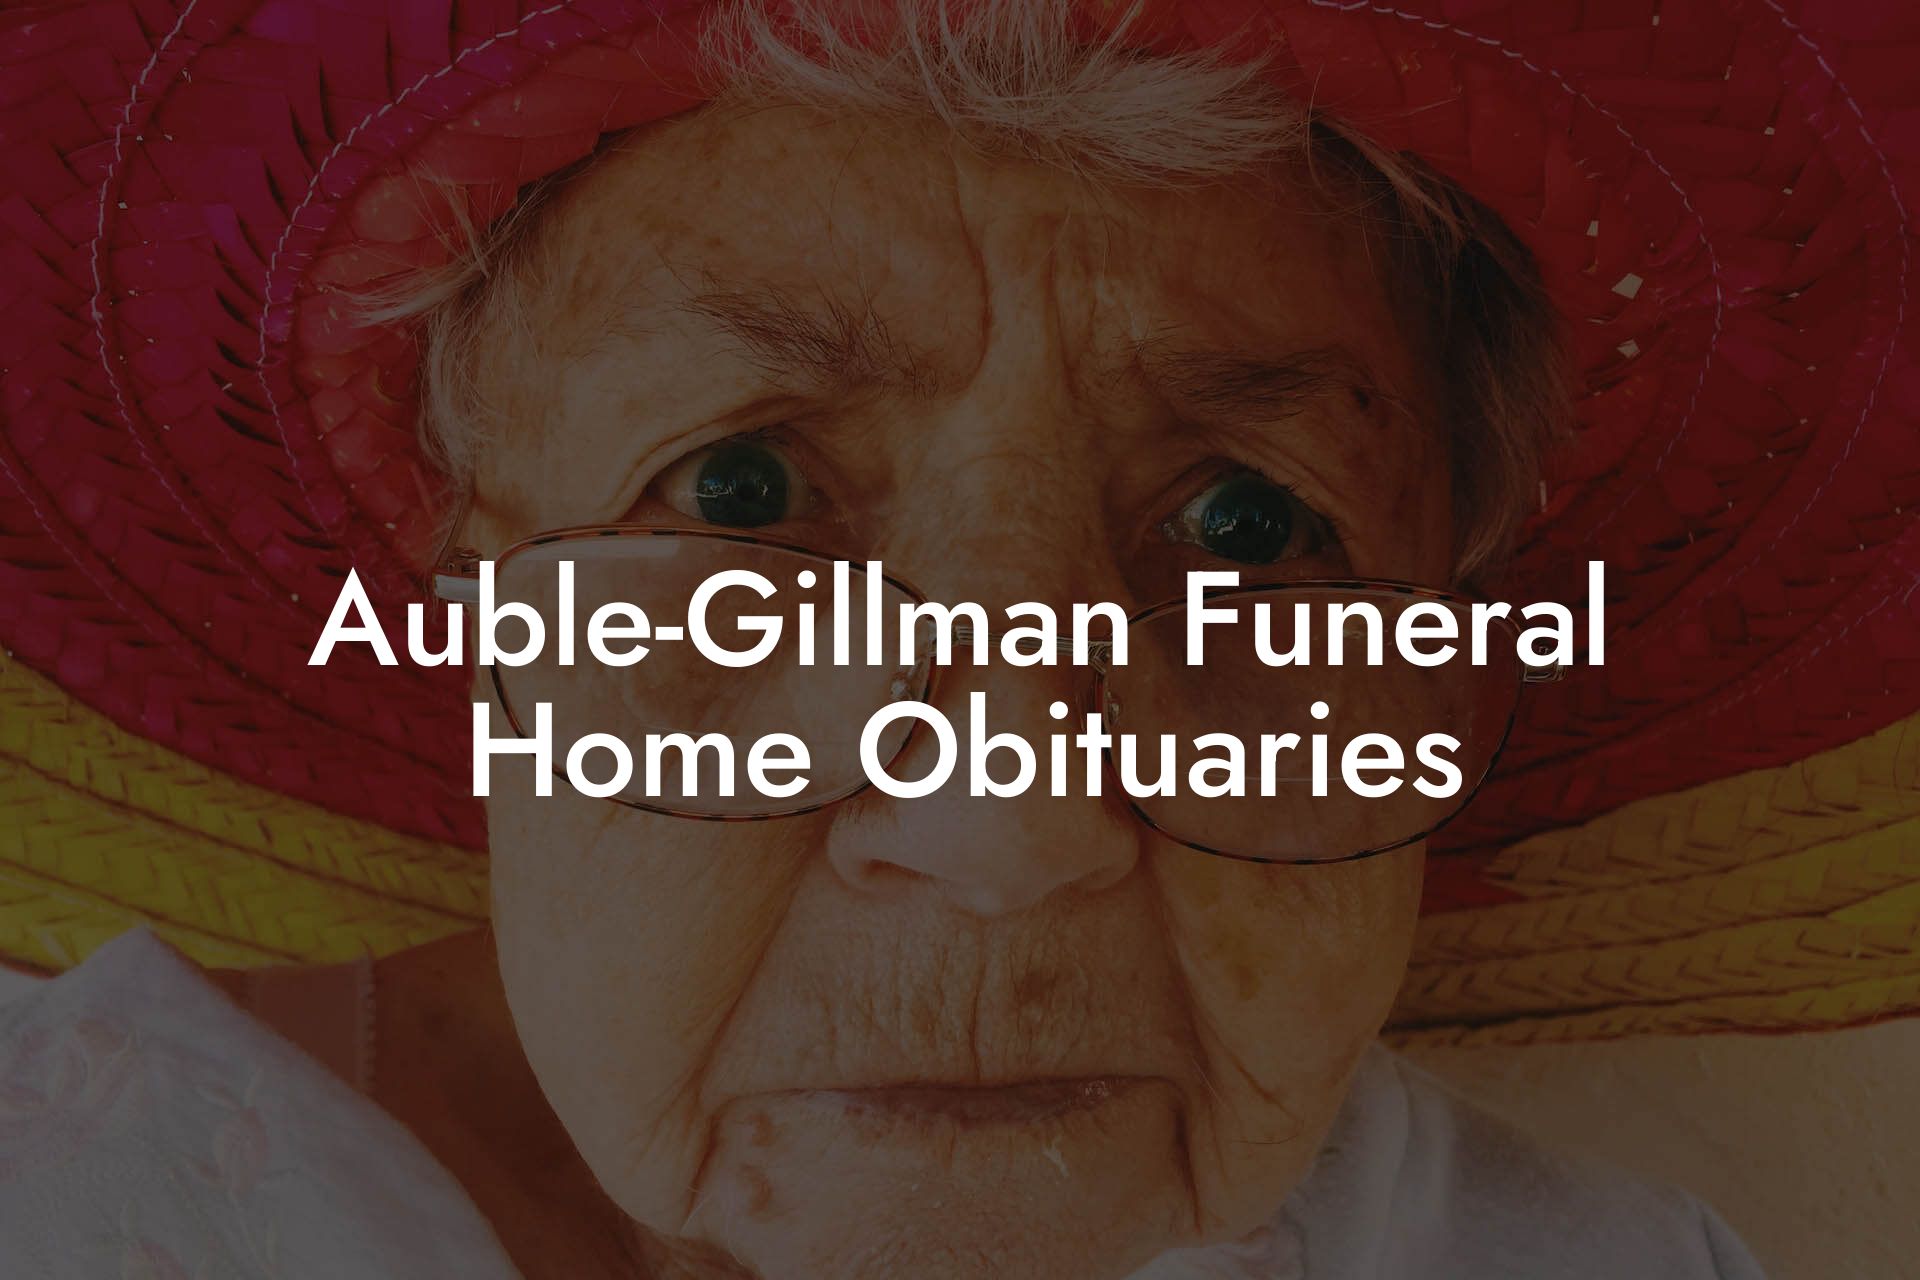 Auble-Gillman Funeral Home Obituaries